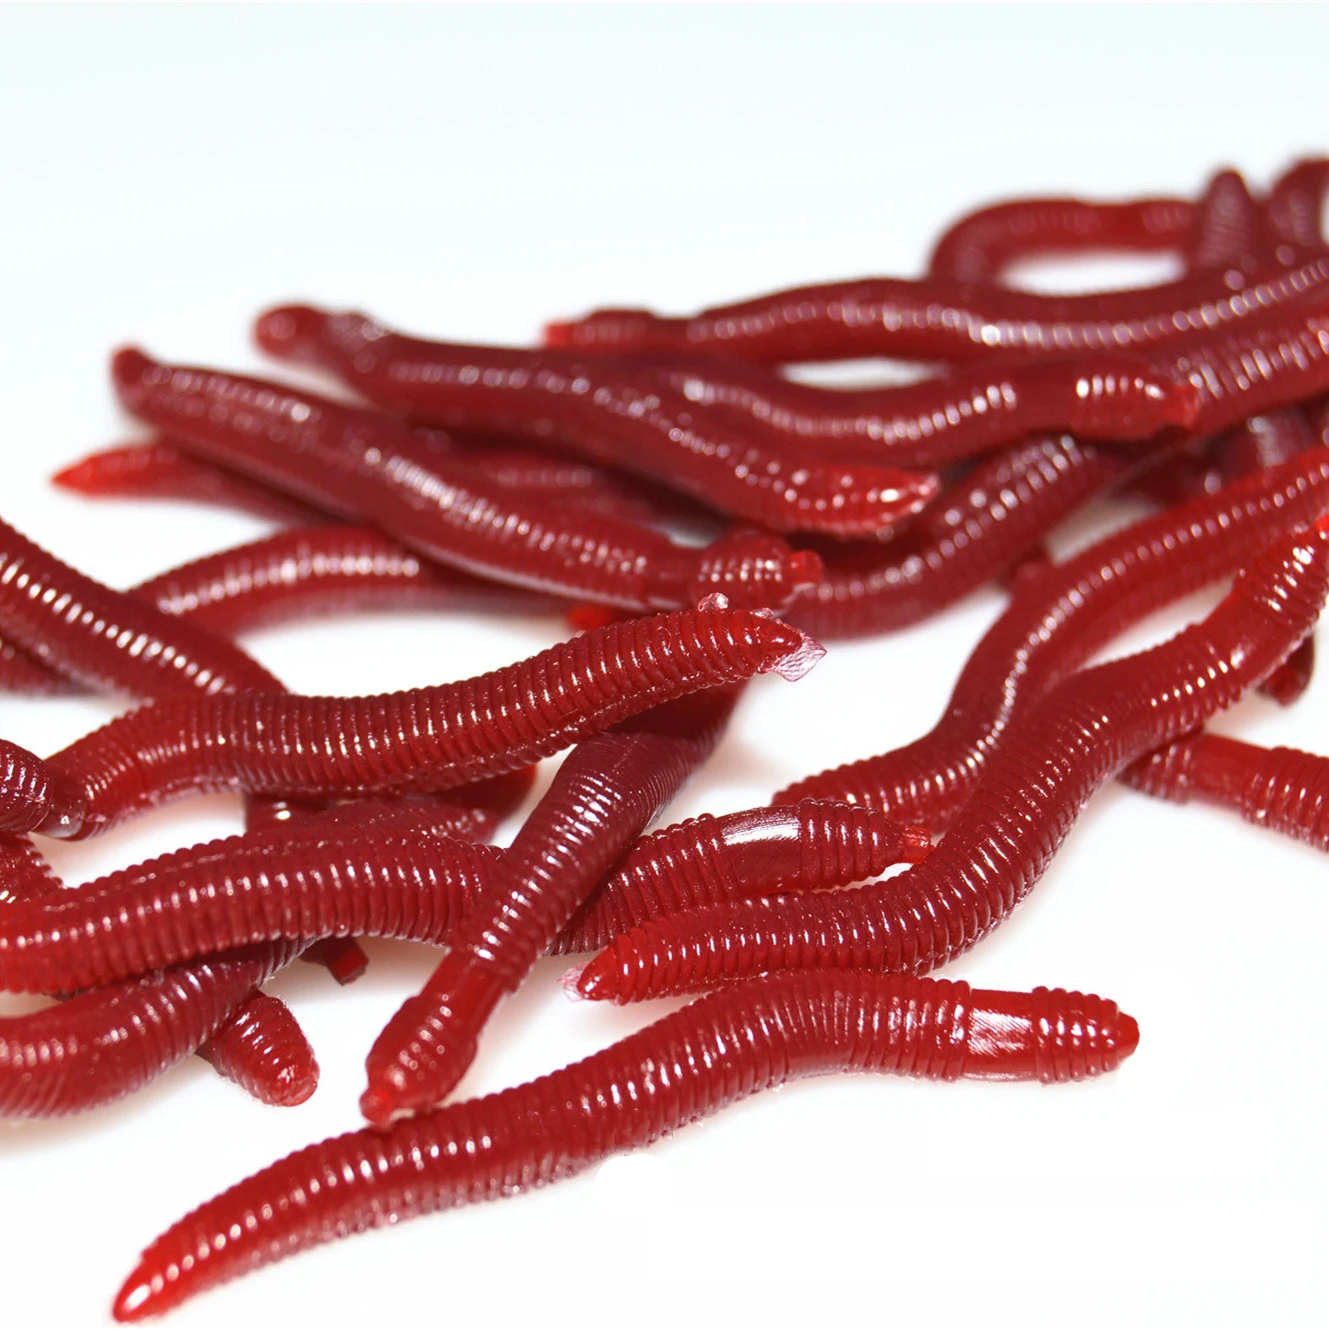 

WEIHE 3.5cm 0.25g Isca Artificial Simulation Red Earthworm Soft Bait Fishing Lure Lifelike Worm Smell Baits Pesca, See picture